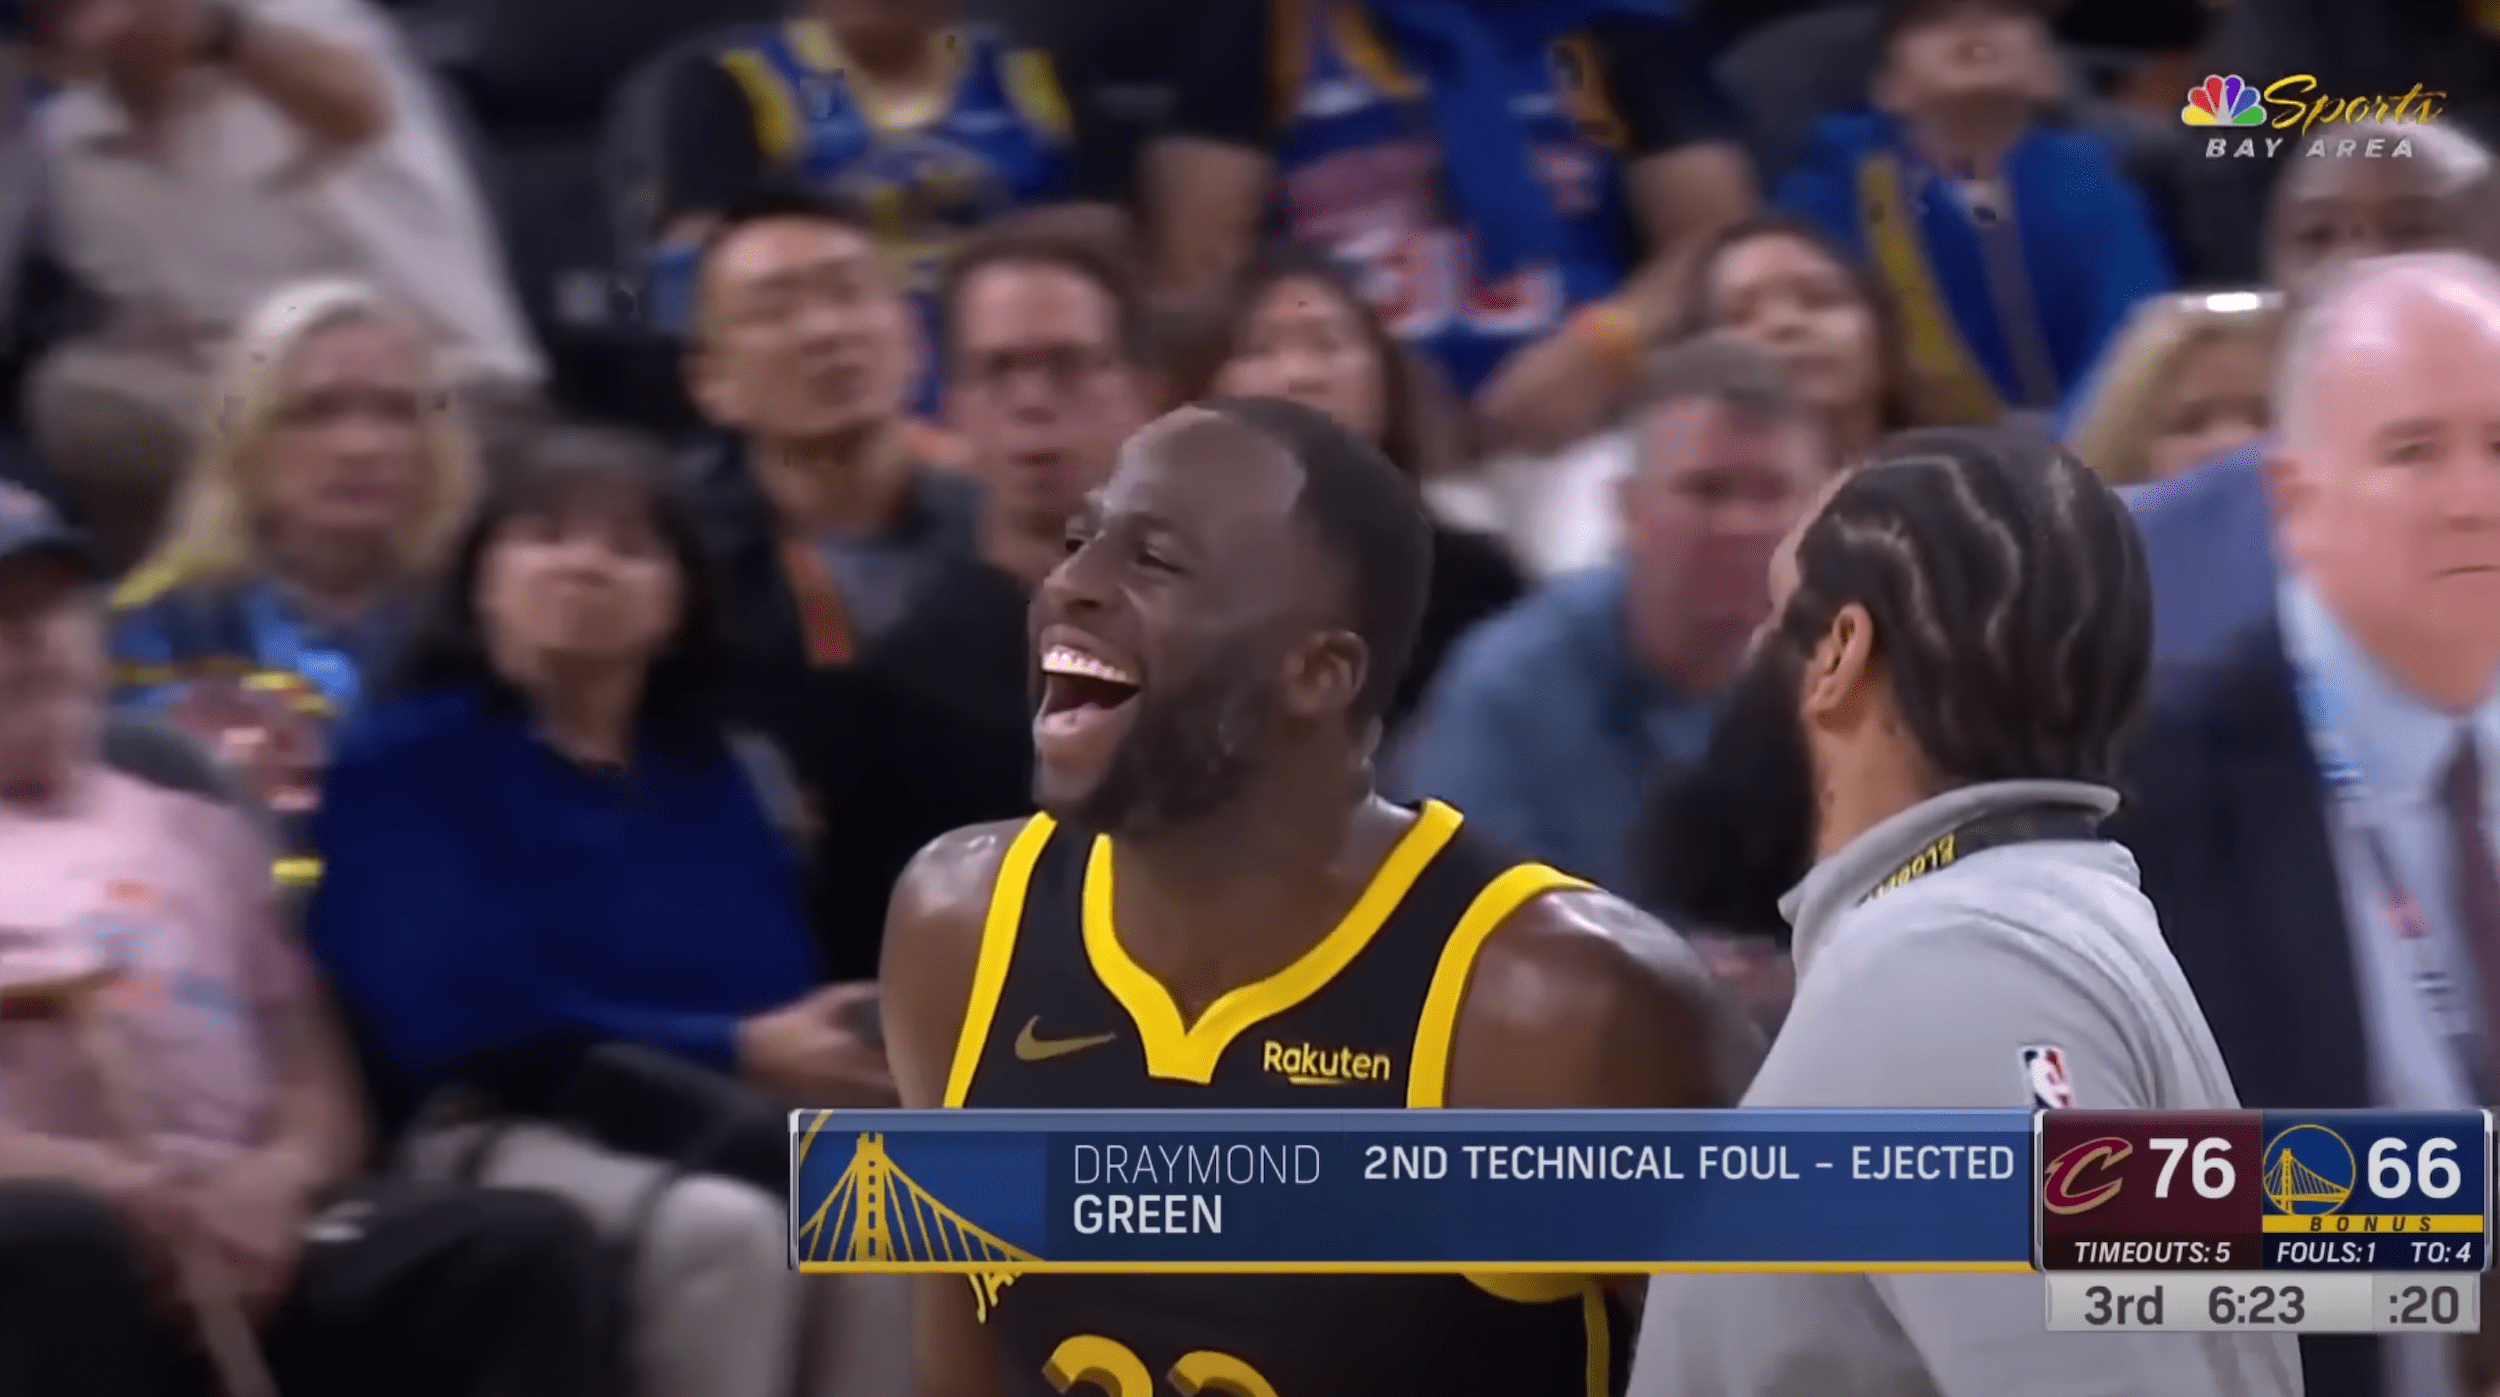 Draymond Greens laughs after being ejected.